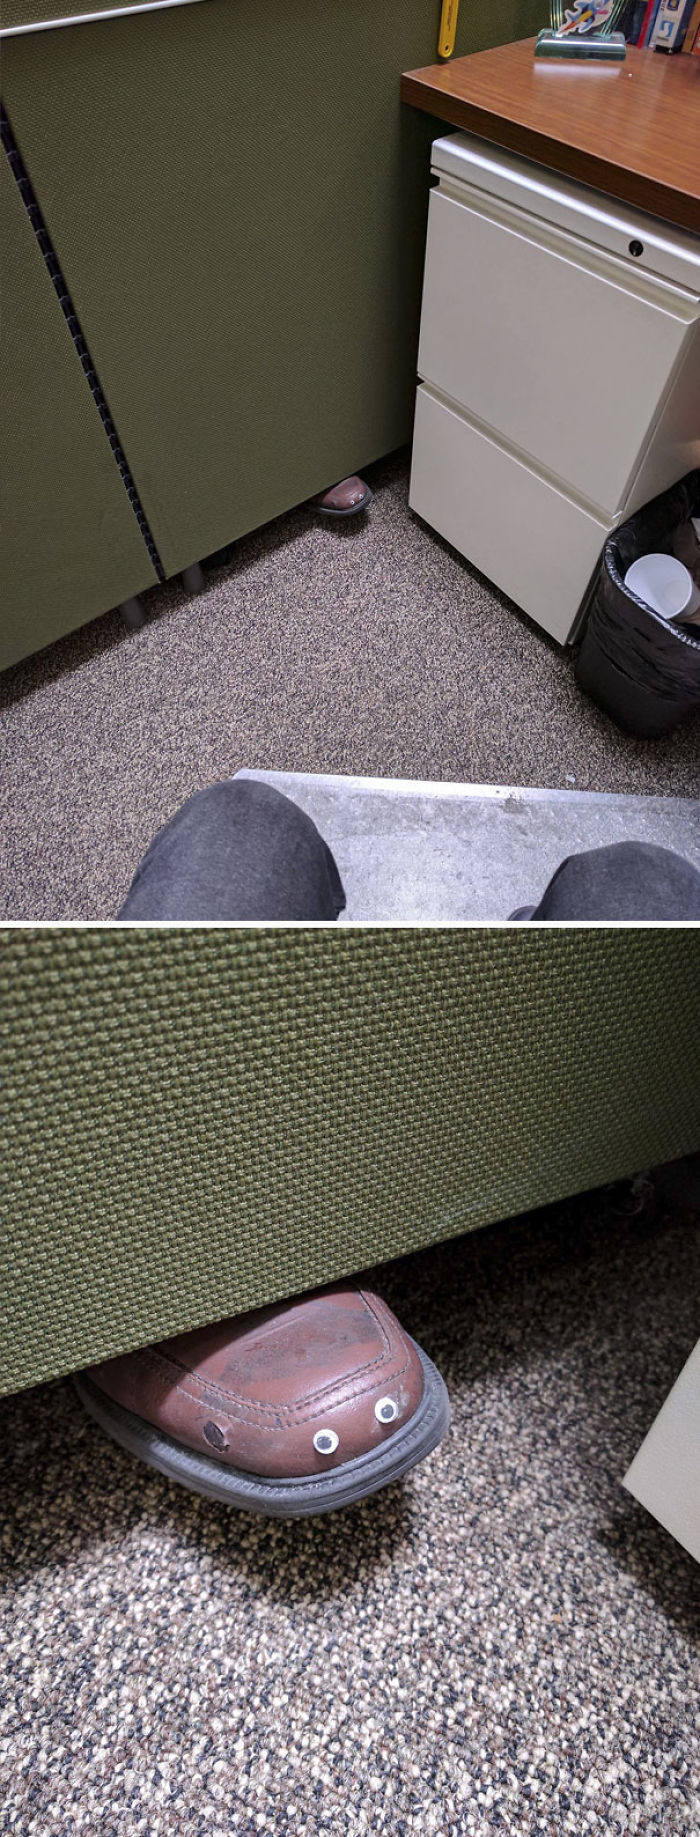 My Coworker Keeps On Placing His Foot Under Our Divider, So I Added Some Googly Eyes